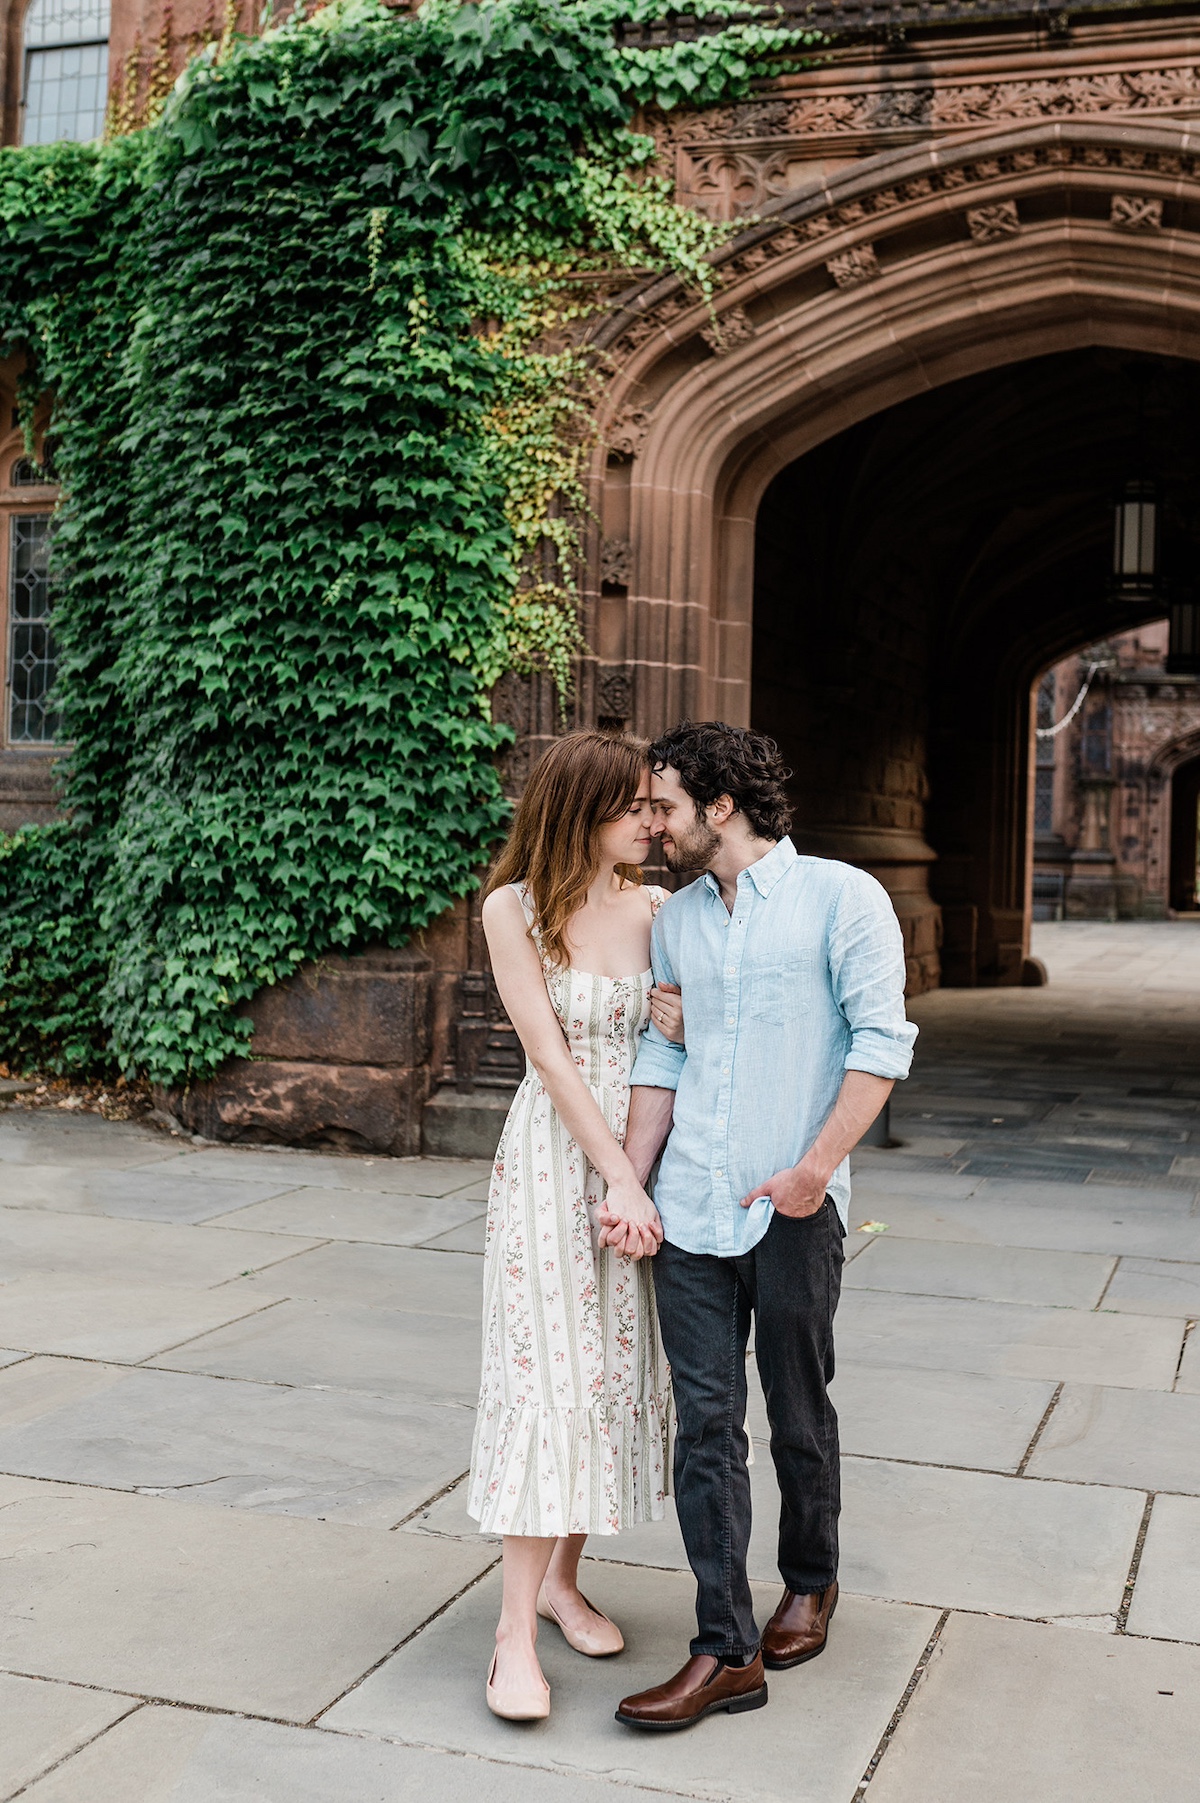 A romantic walk down Princeton's tree-lined path: Page and Christopher hand in hand.